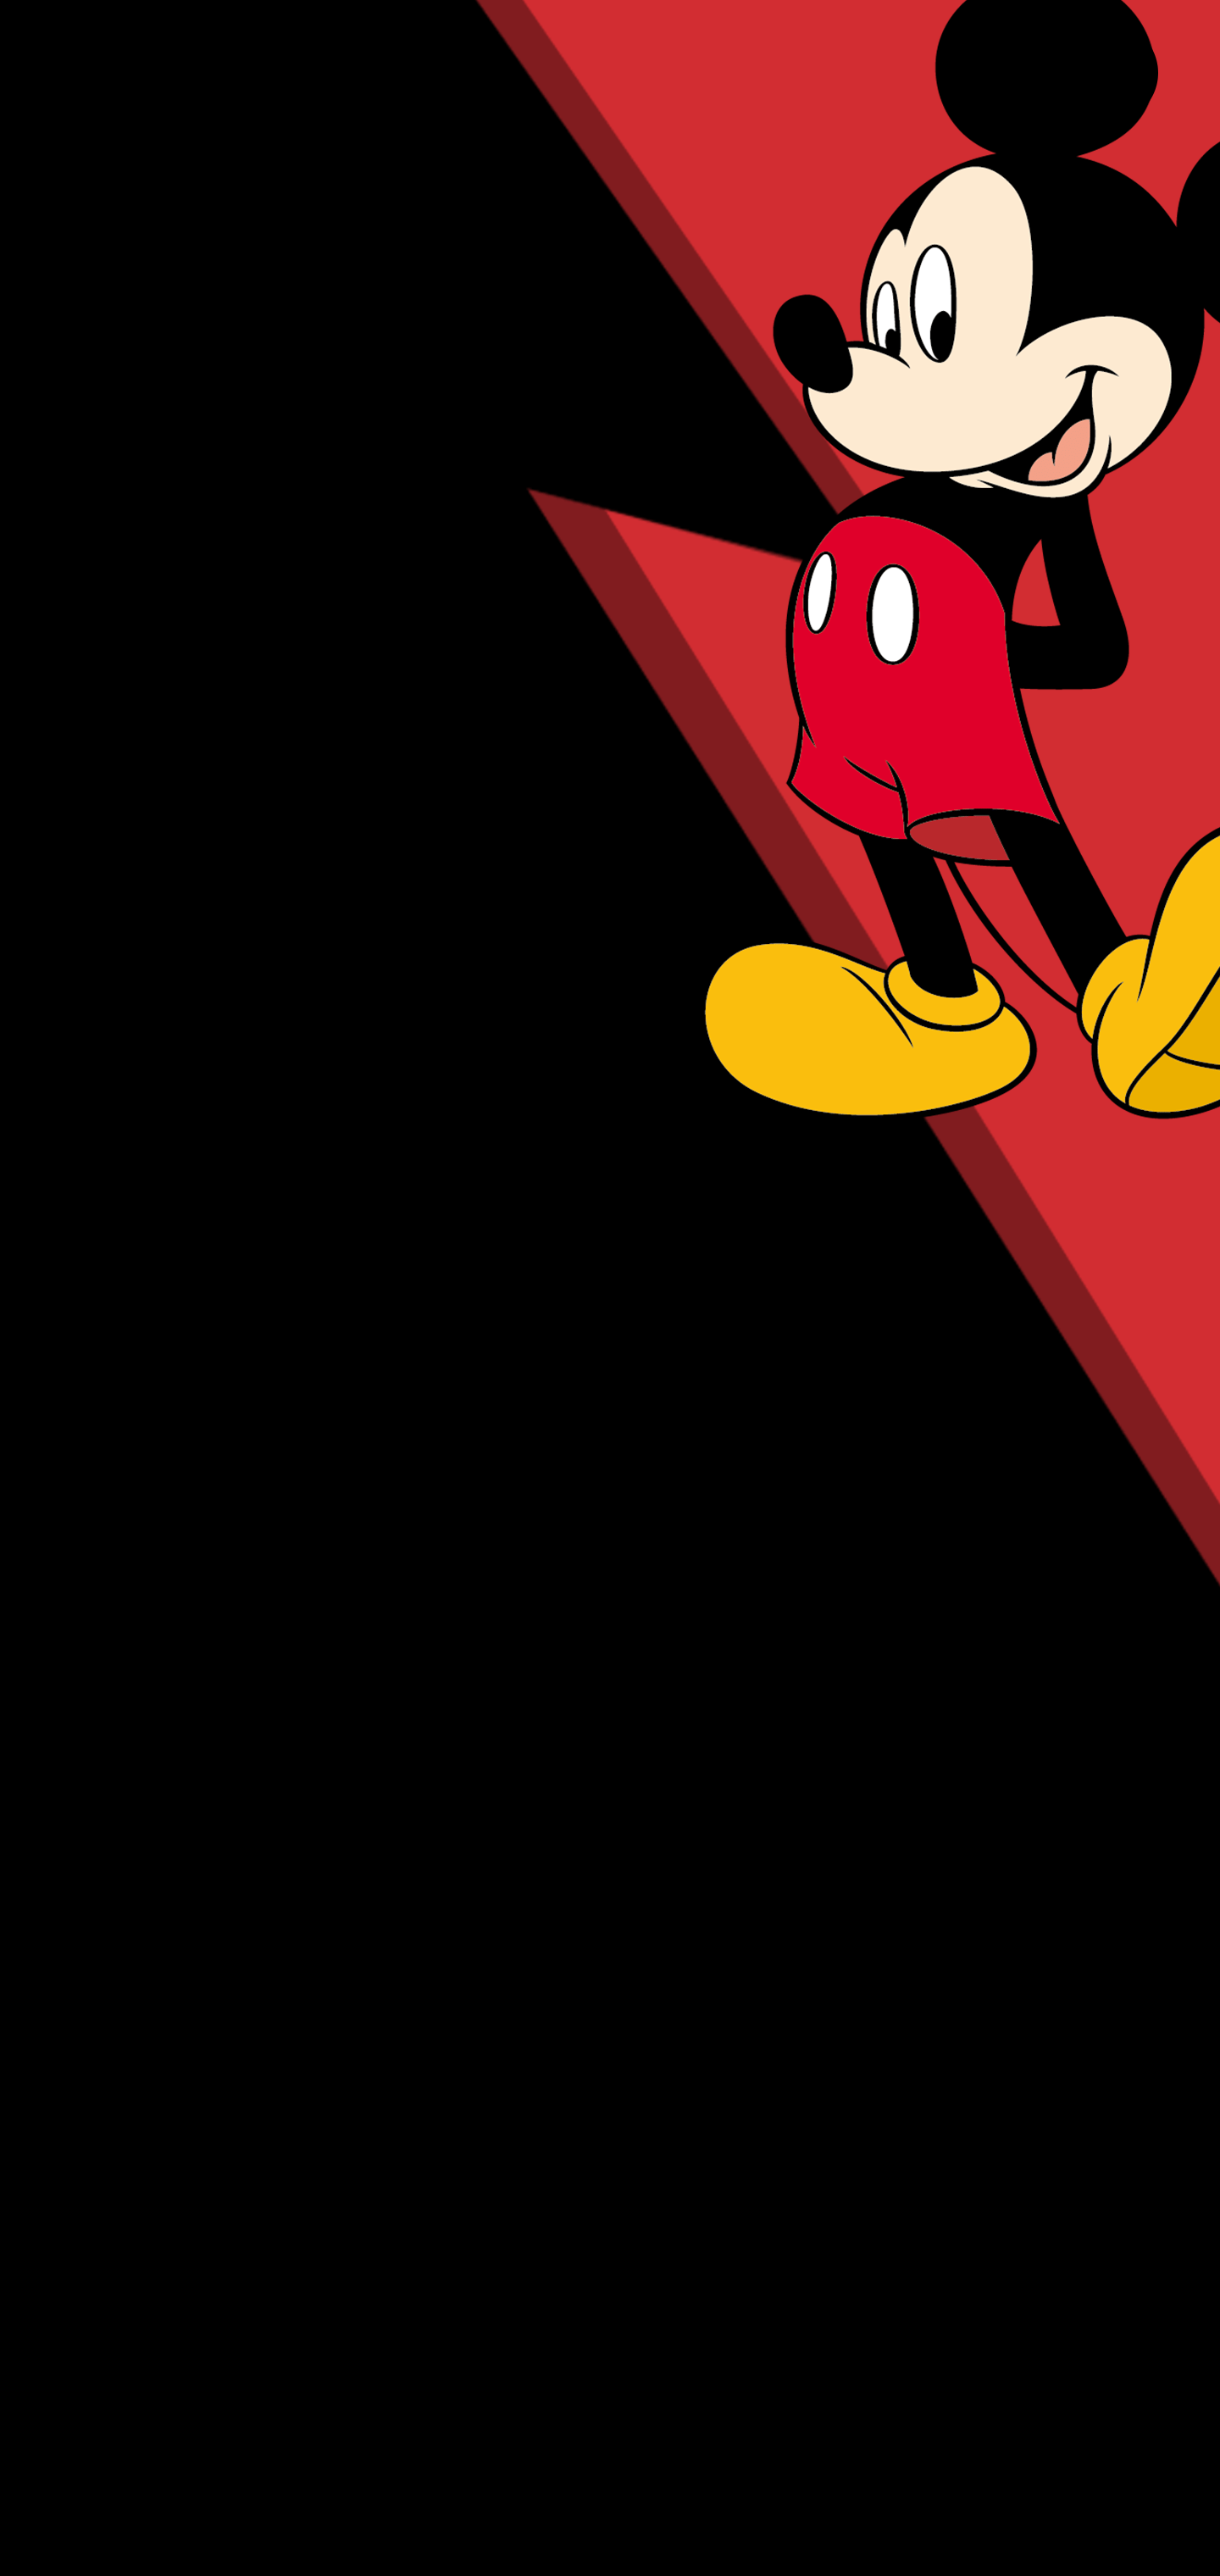 Top 999+ Punch Hole Wallpaper Full HD, 4K✓Free to Use